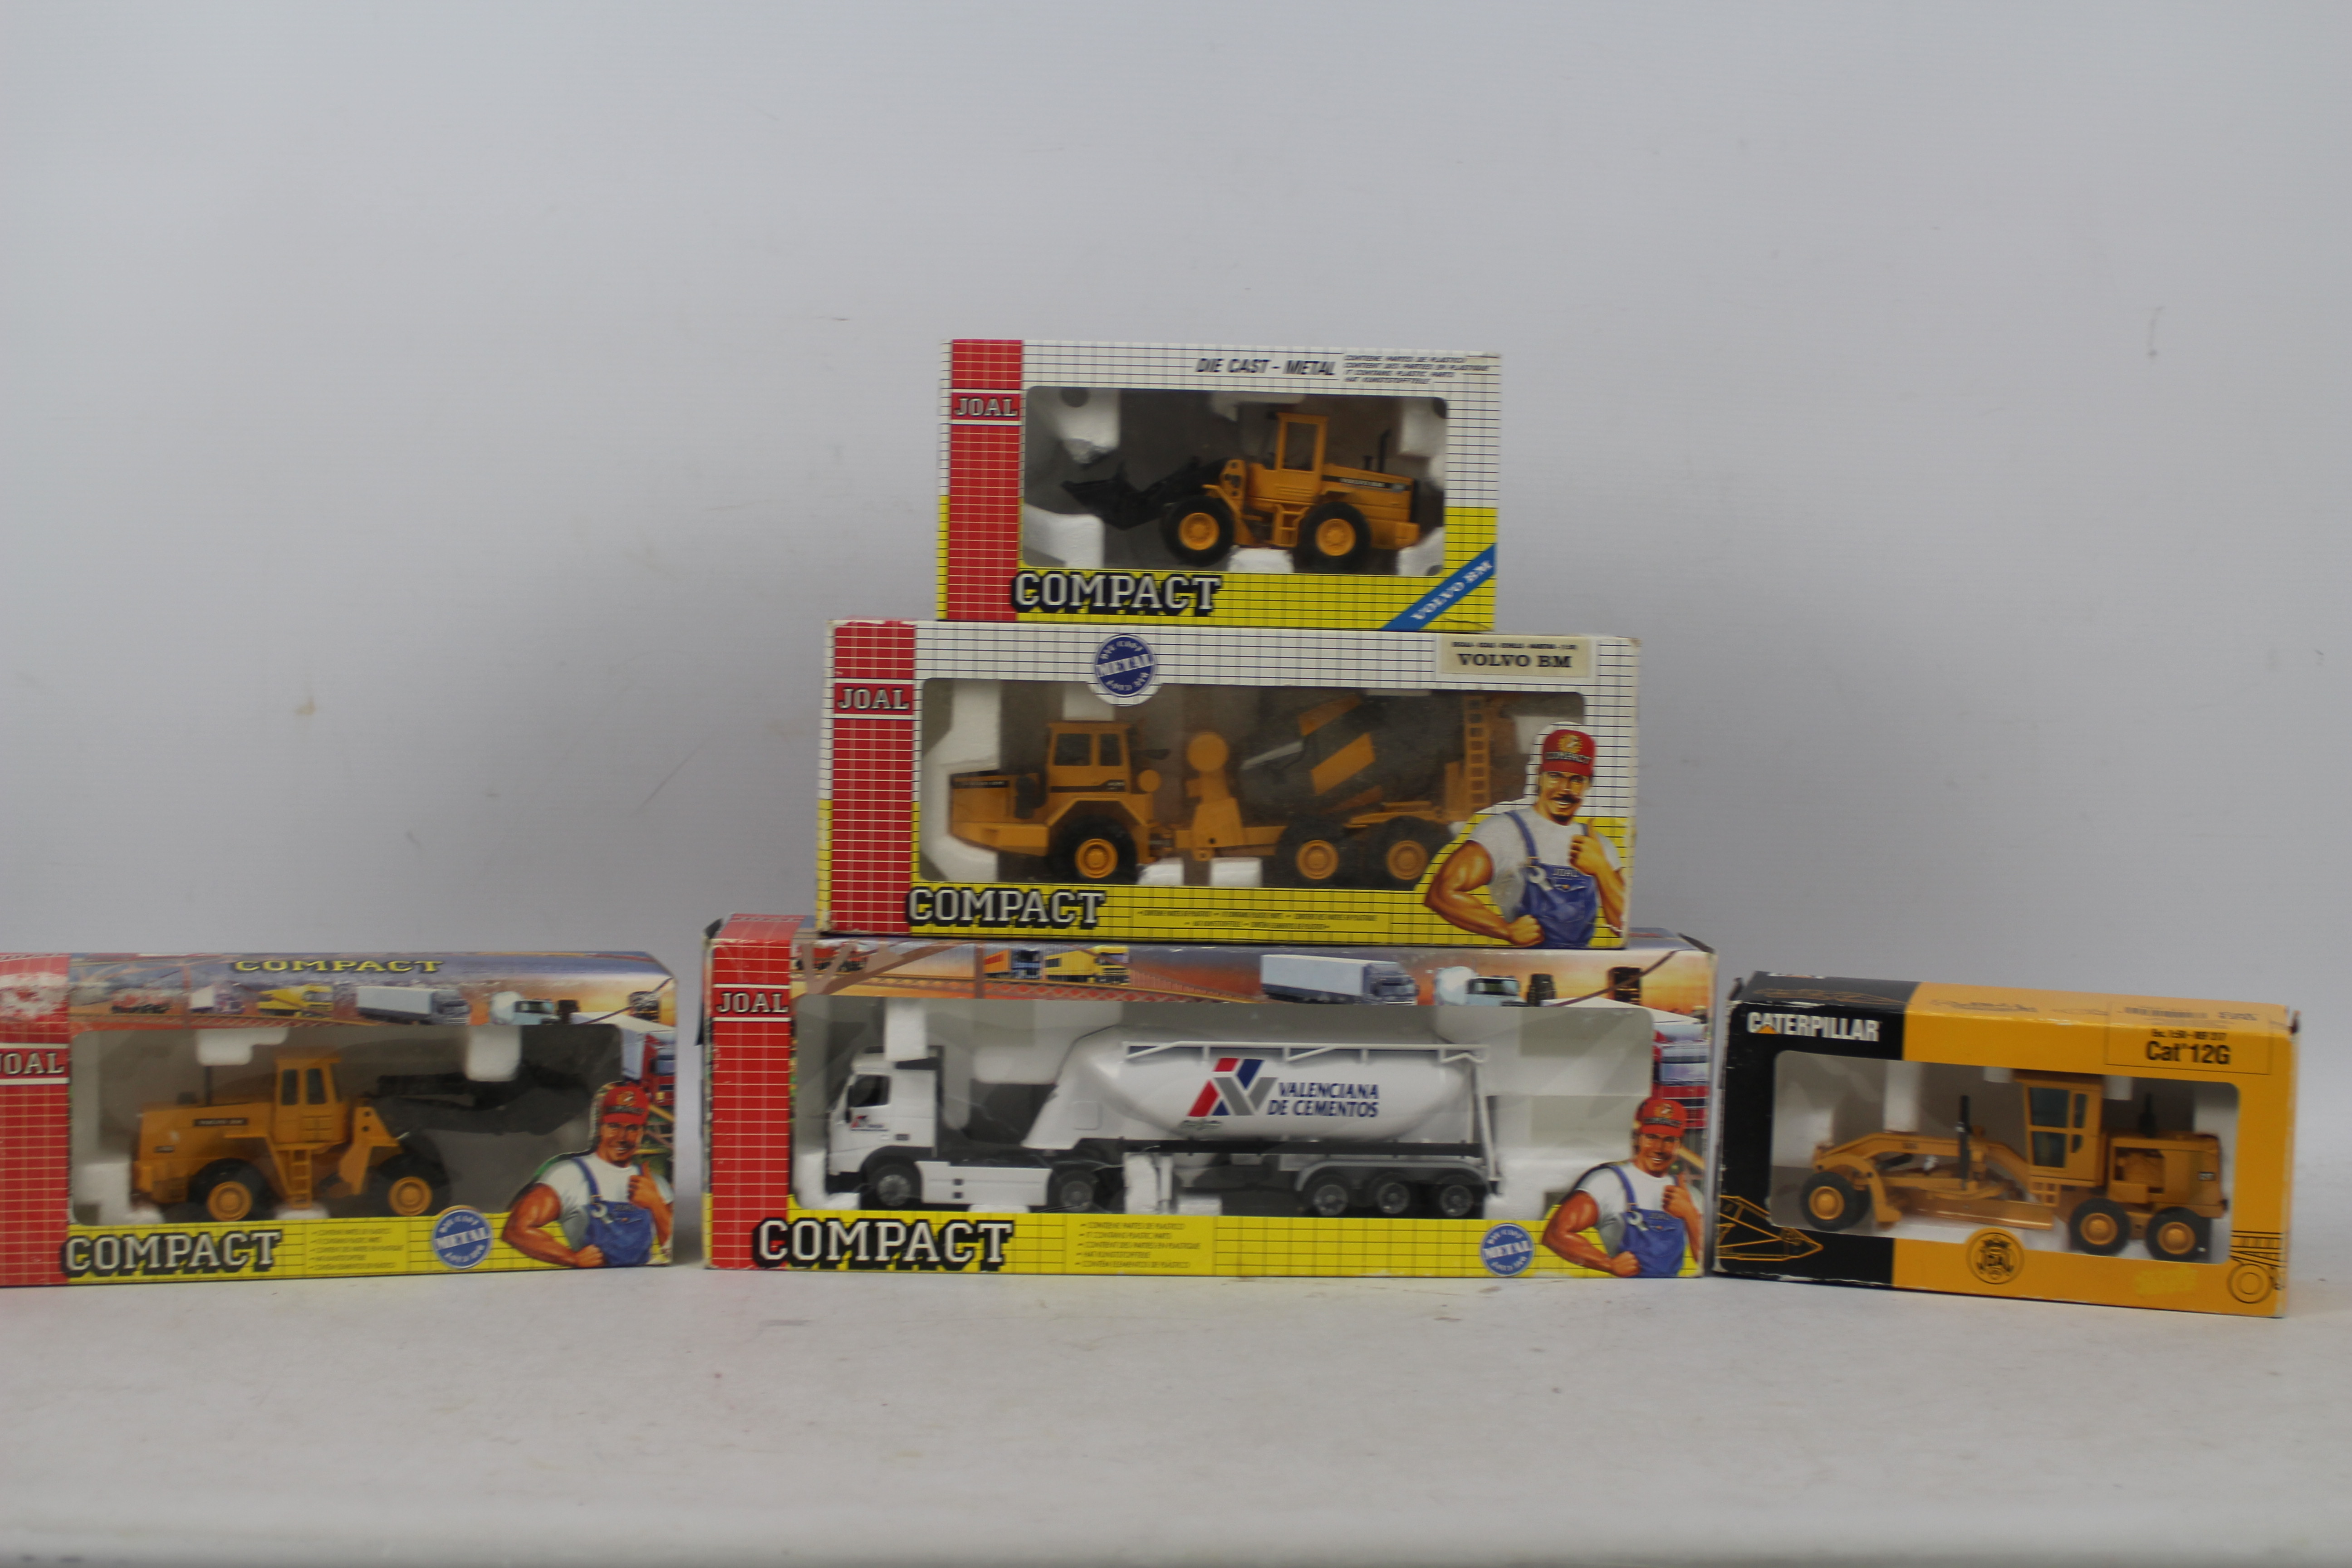 Joal - Five boxed diecast mainly construction vehicles in 1:50 scale from Joal.